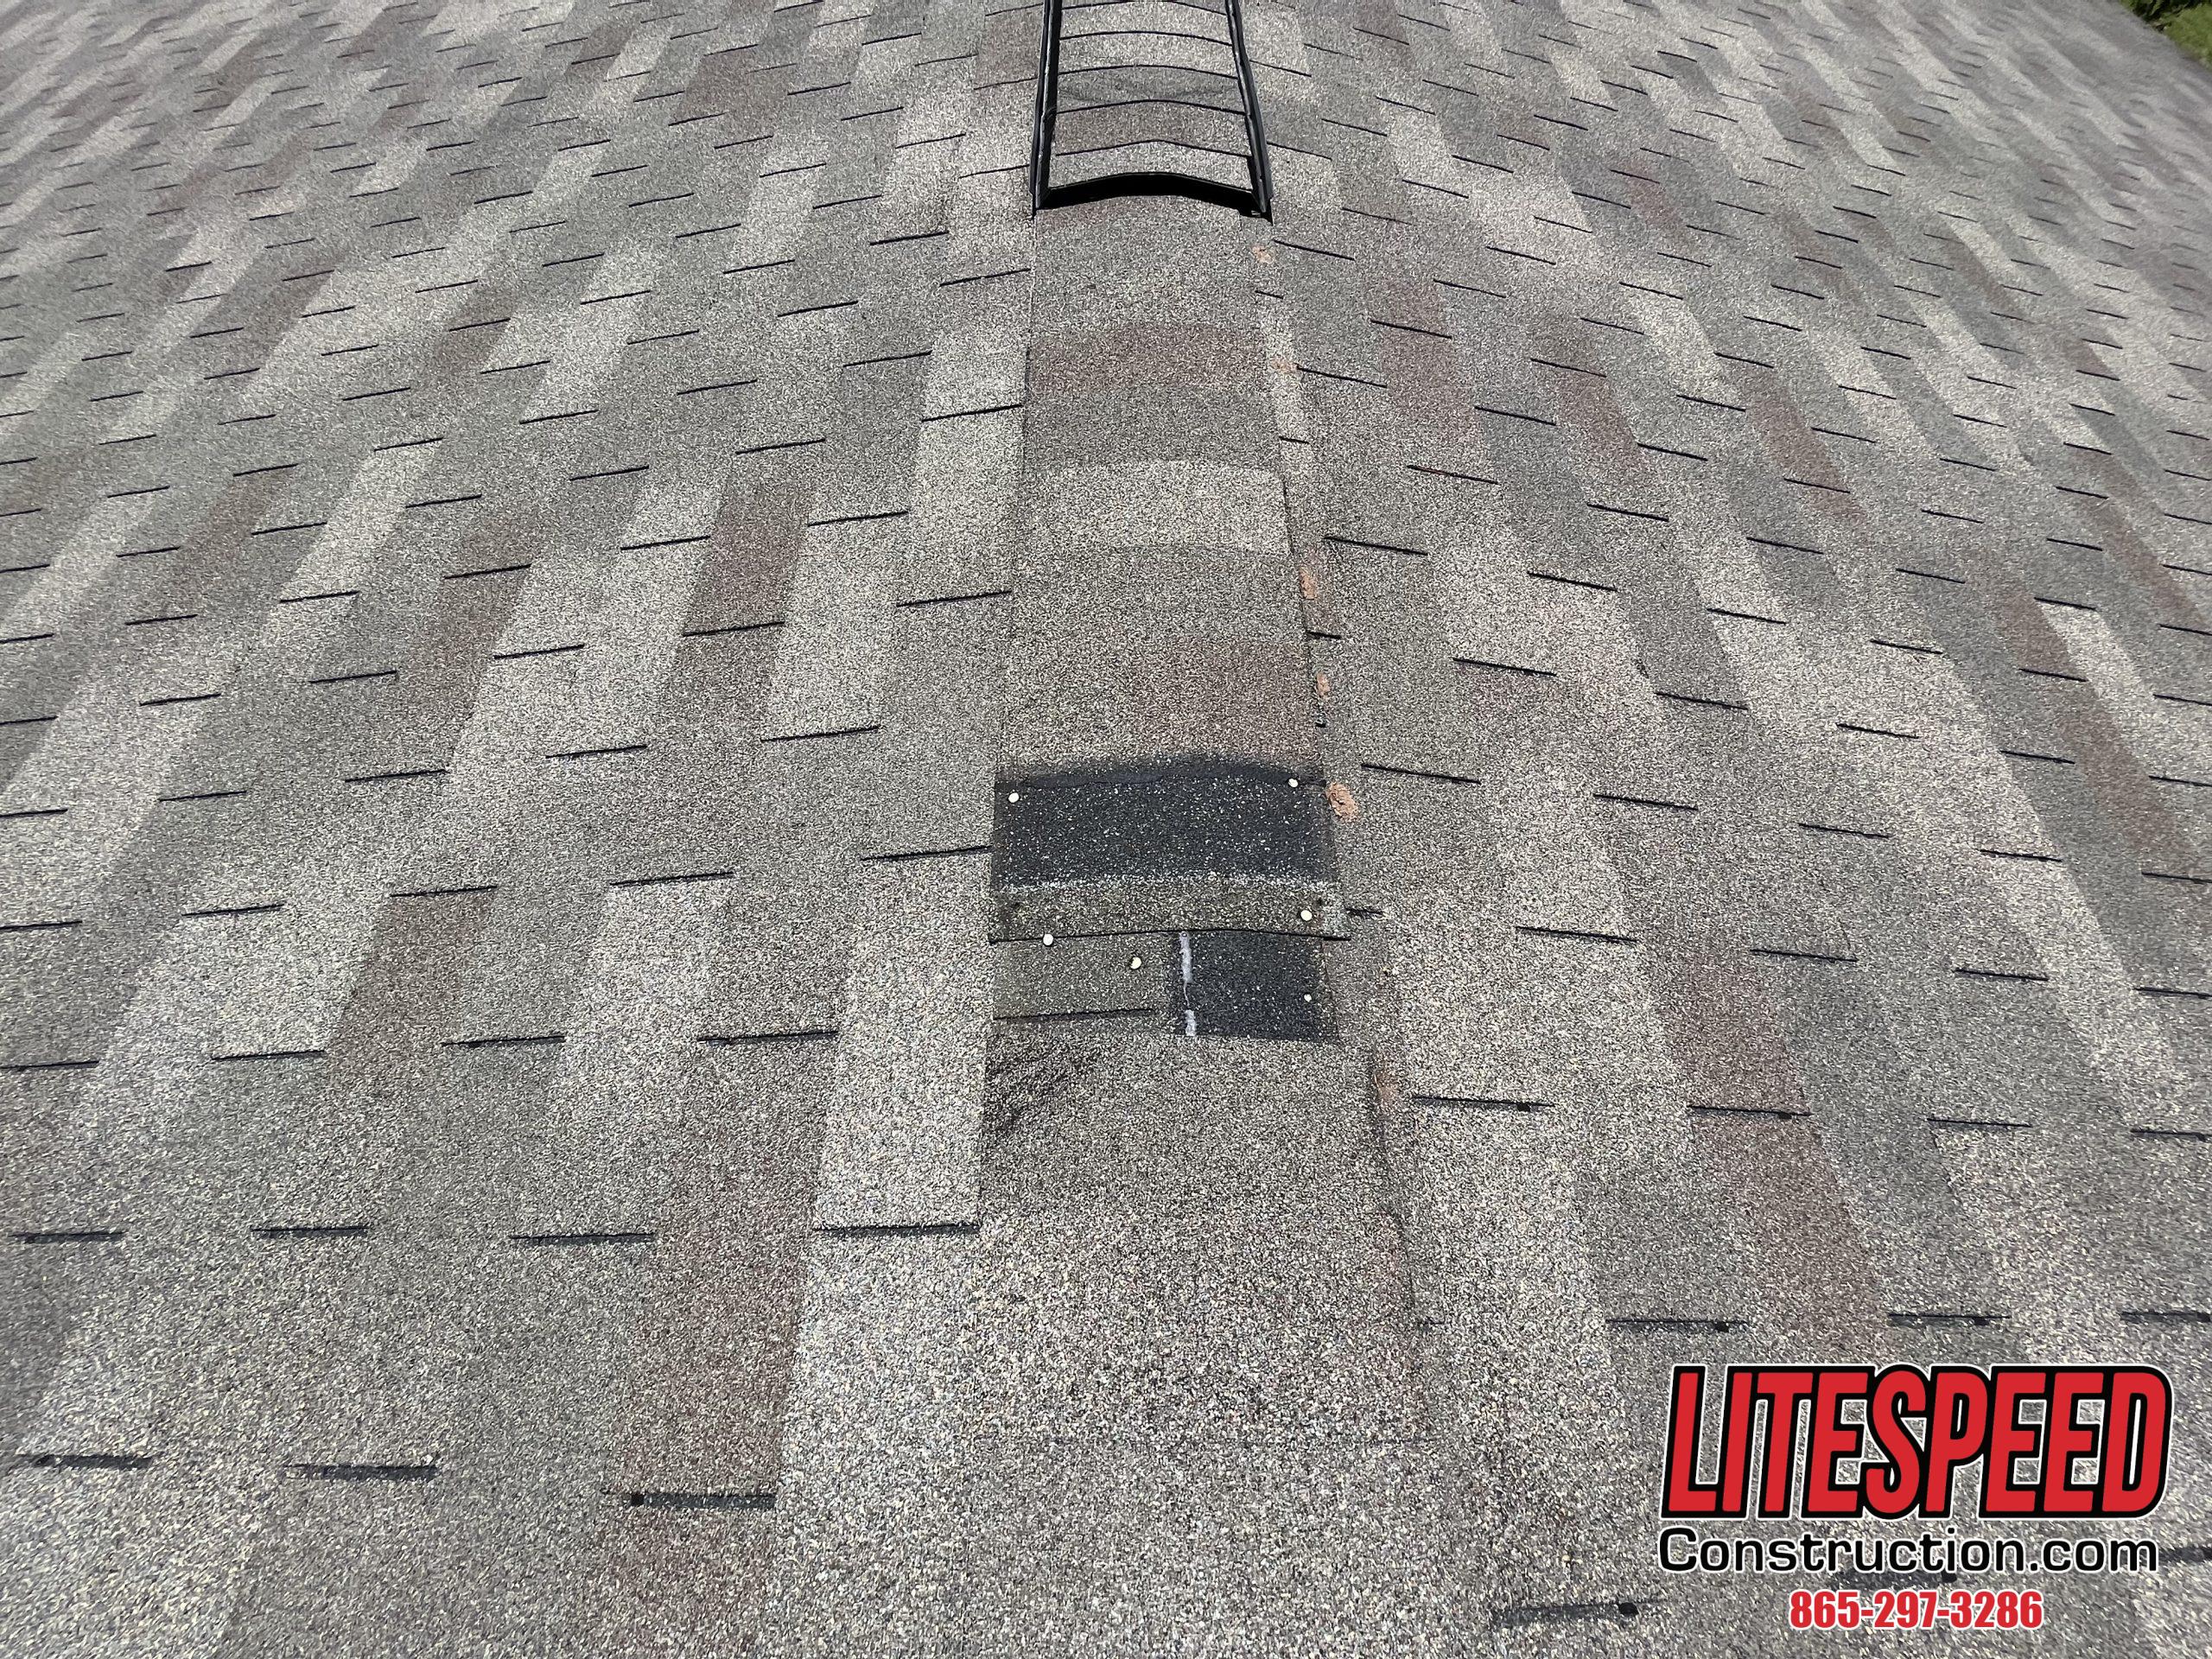 This is a picture of missing ridge cap shingles